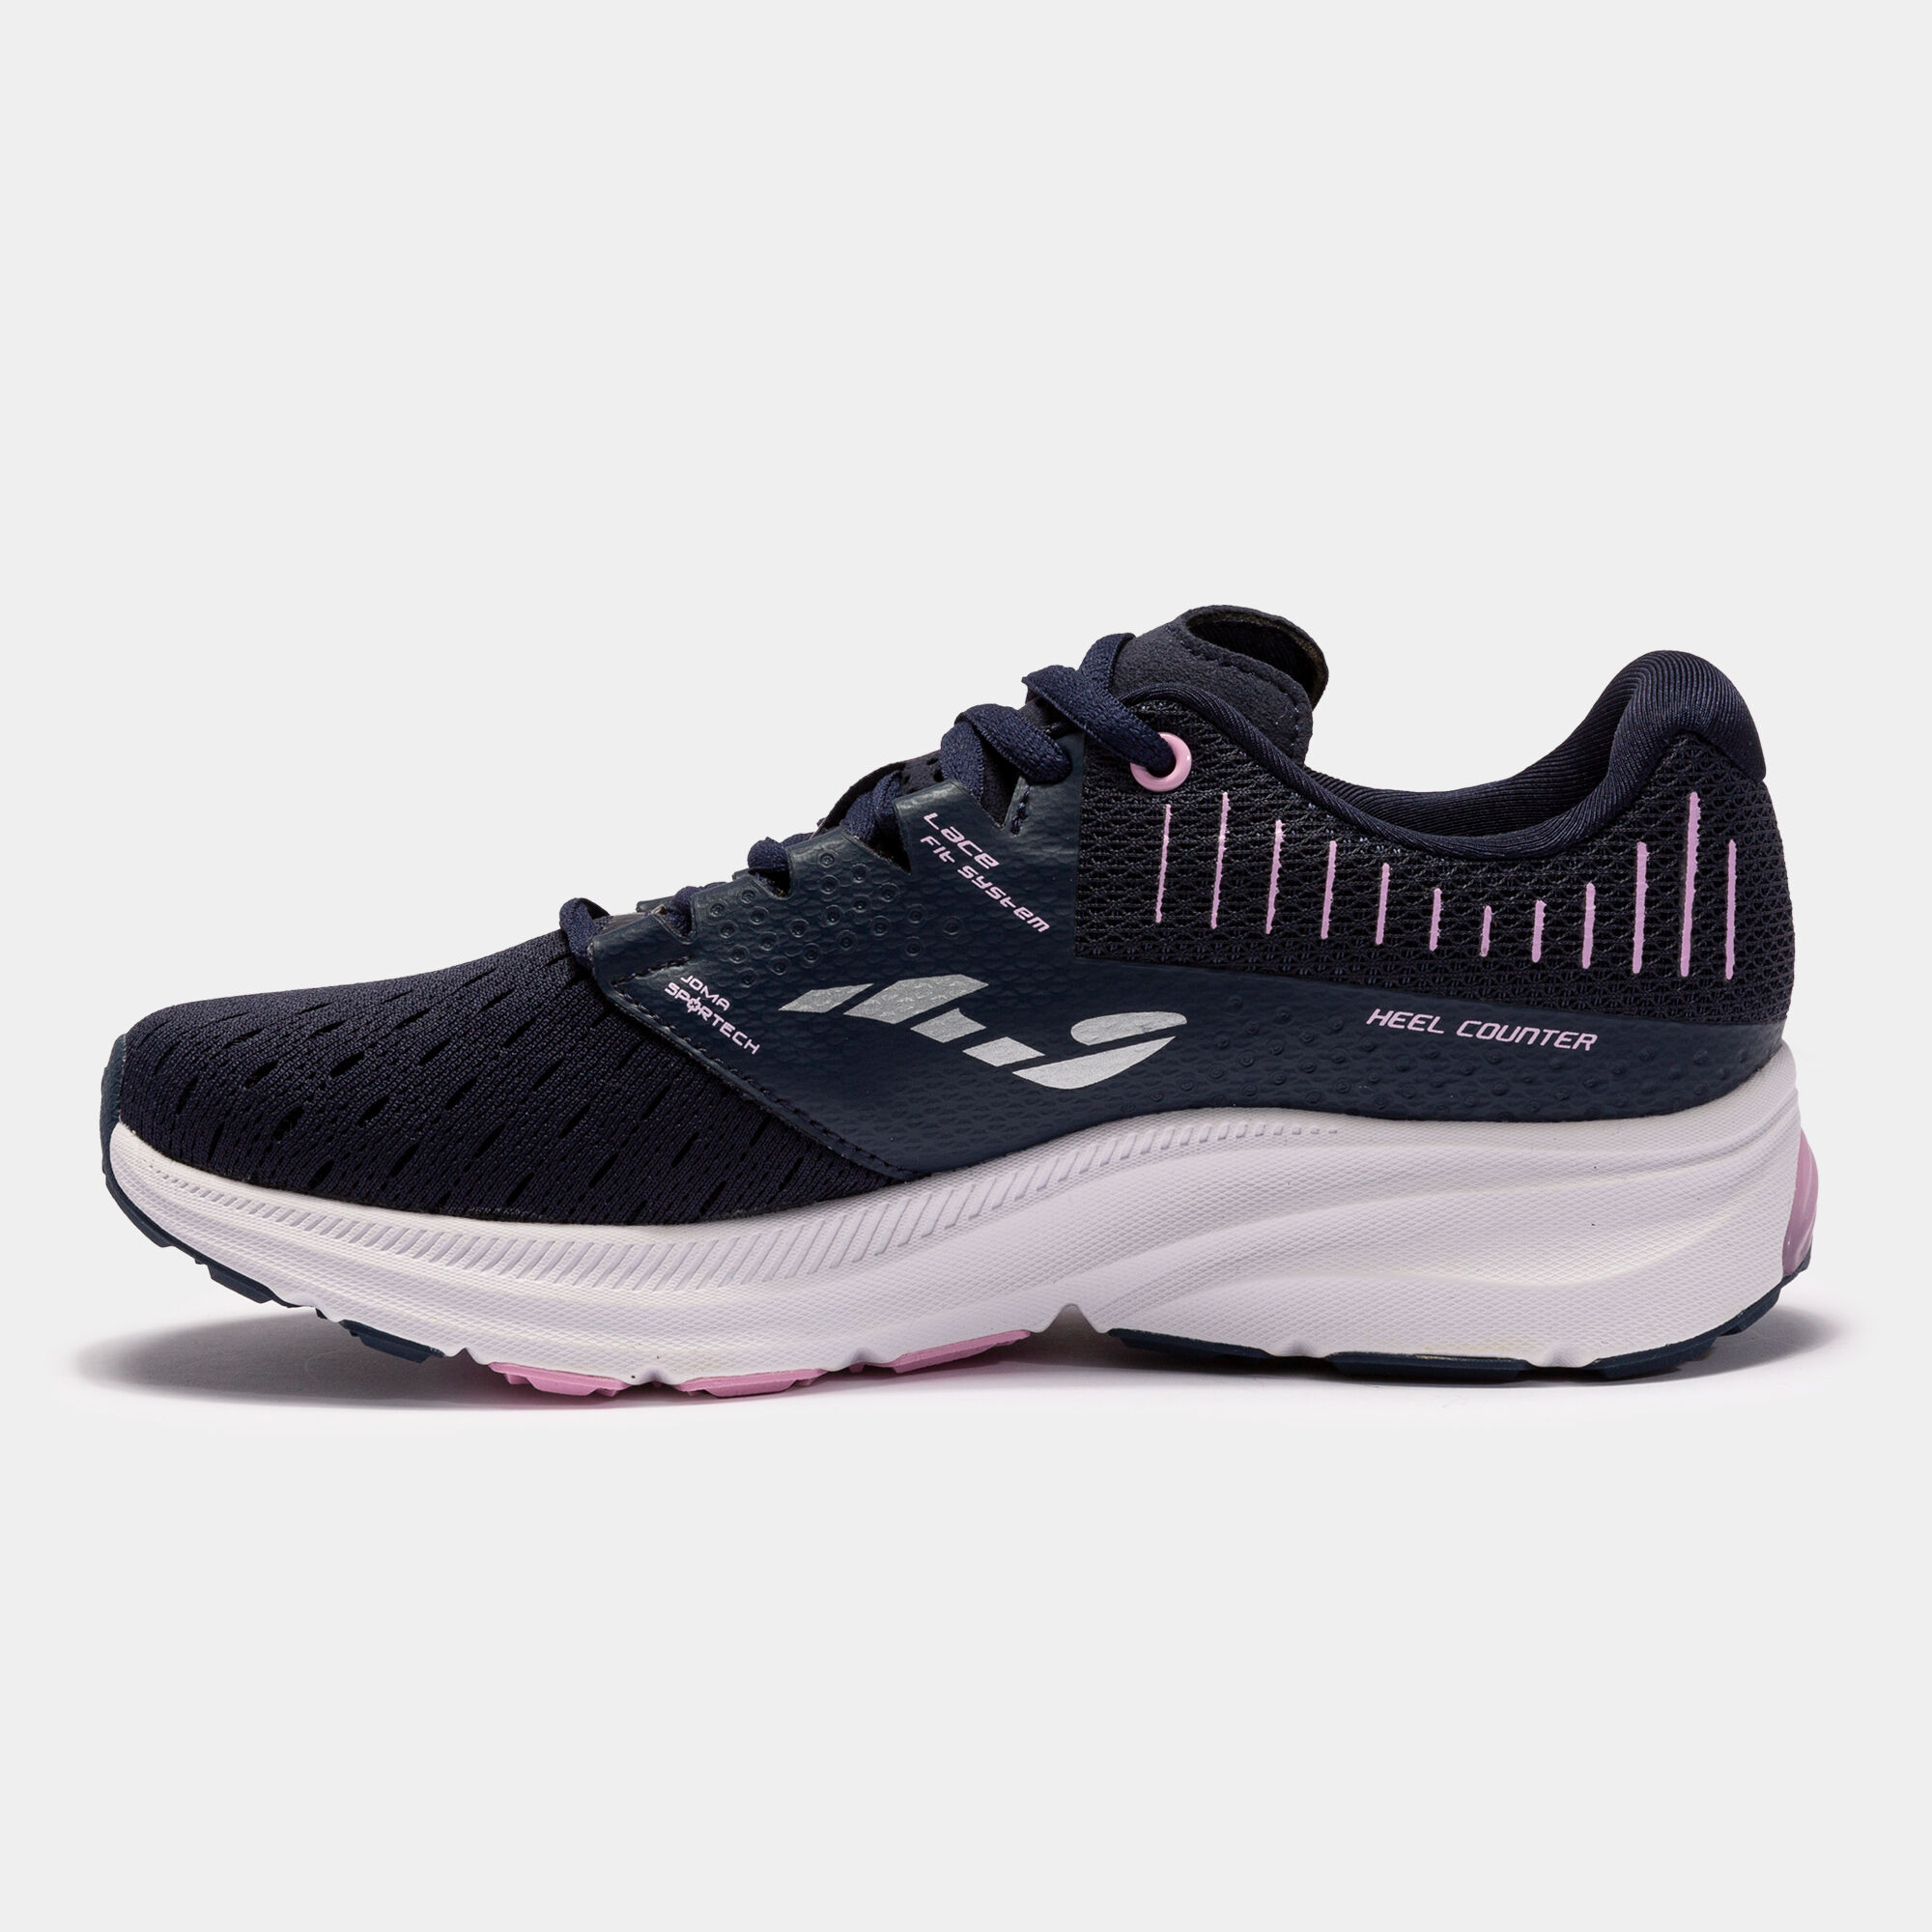 RUNNING SHOES VICTORY 22 WOMAN NAVY BLUE PINK